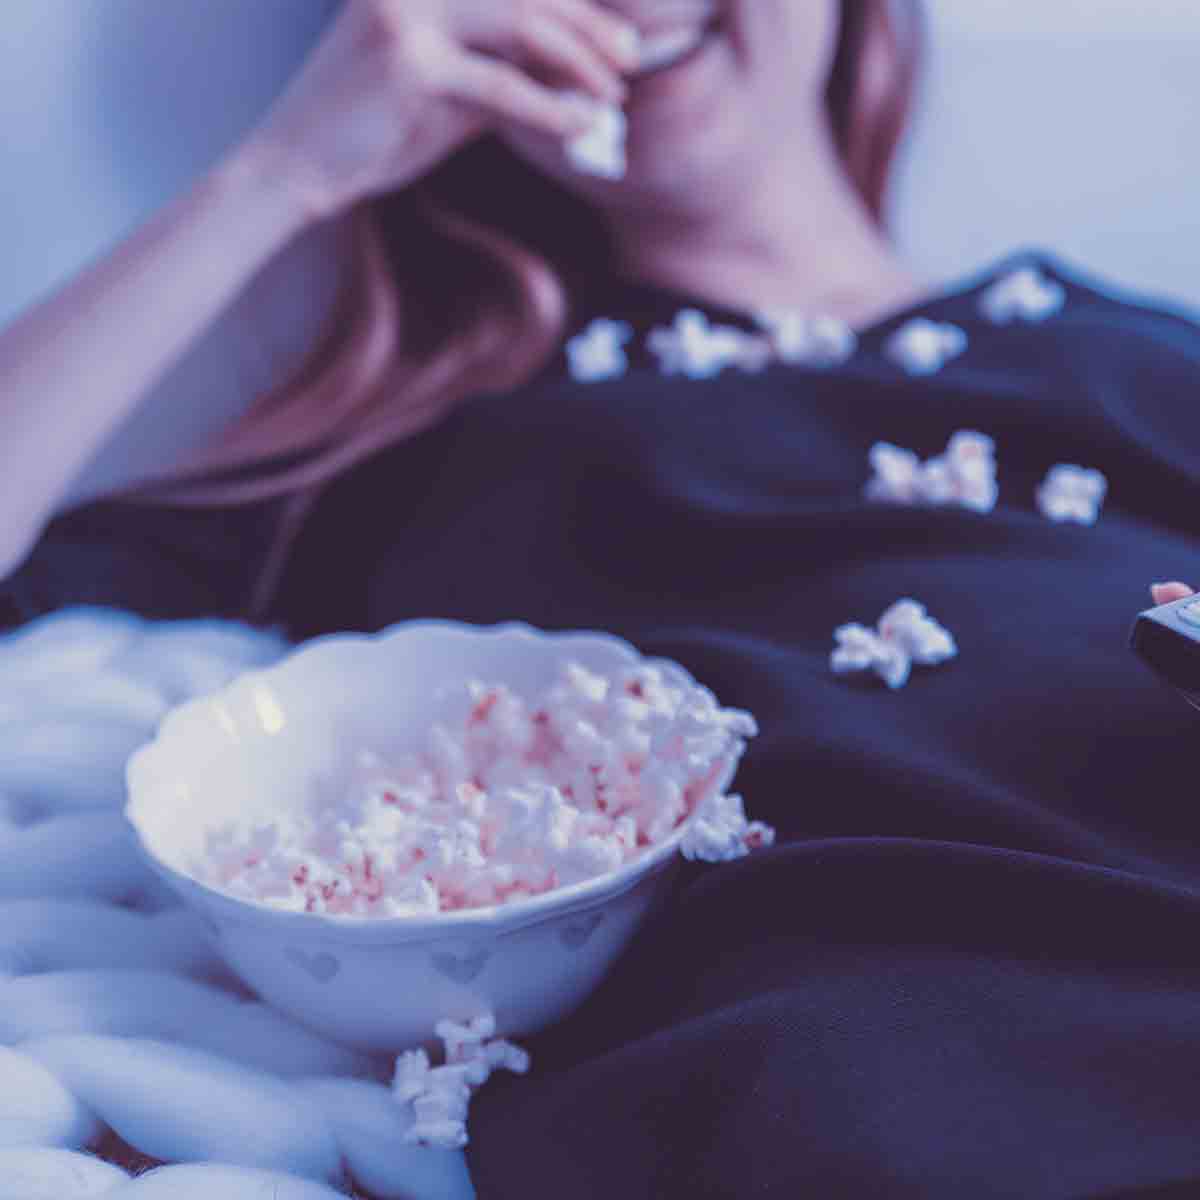 Woman Eating Popcorn And Smiling